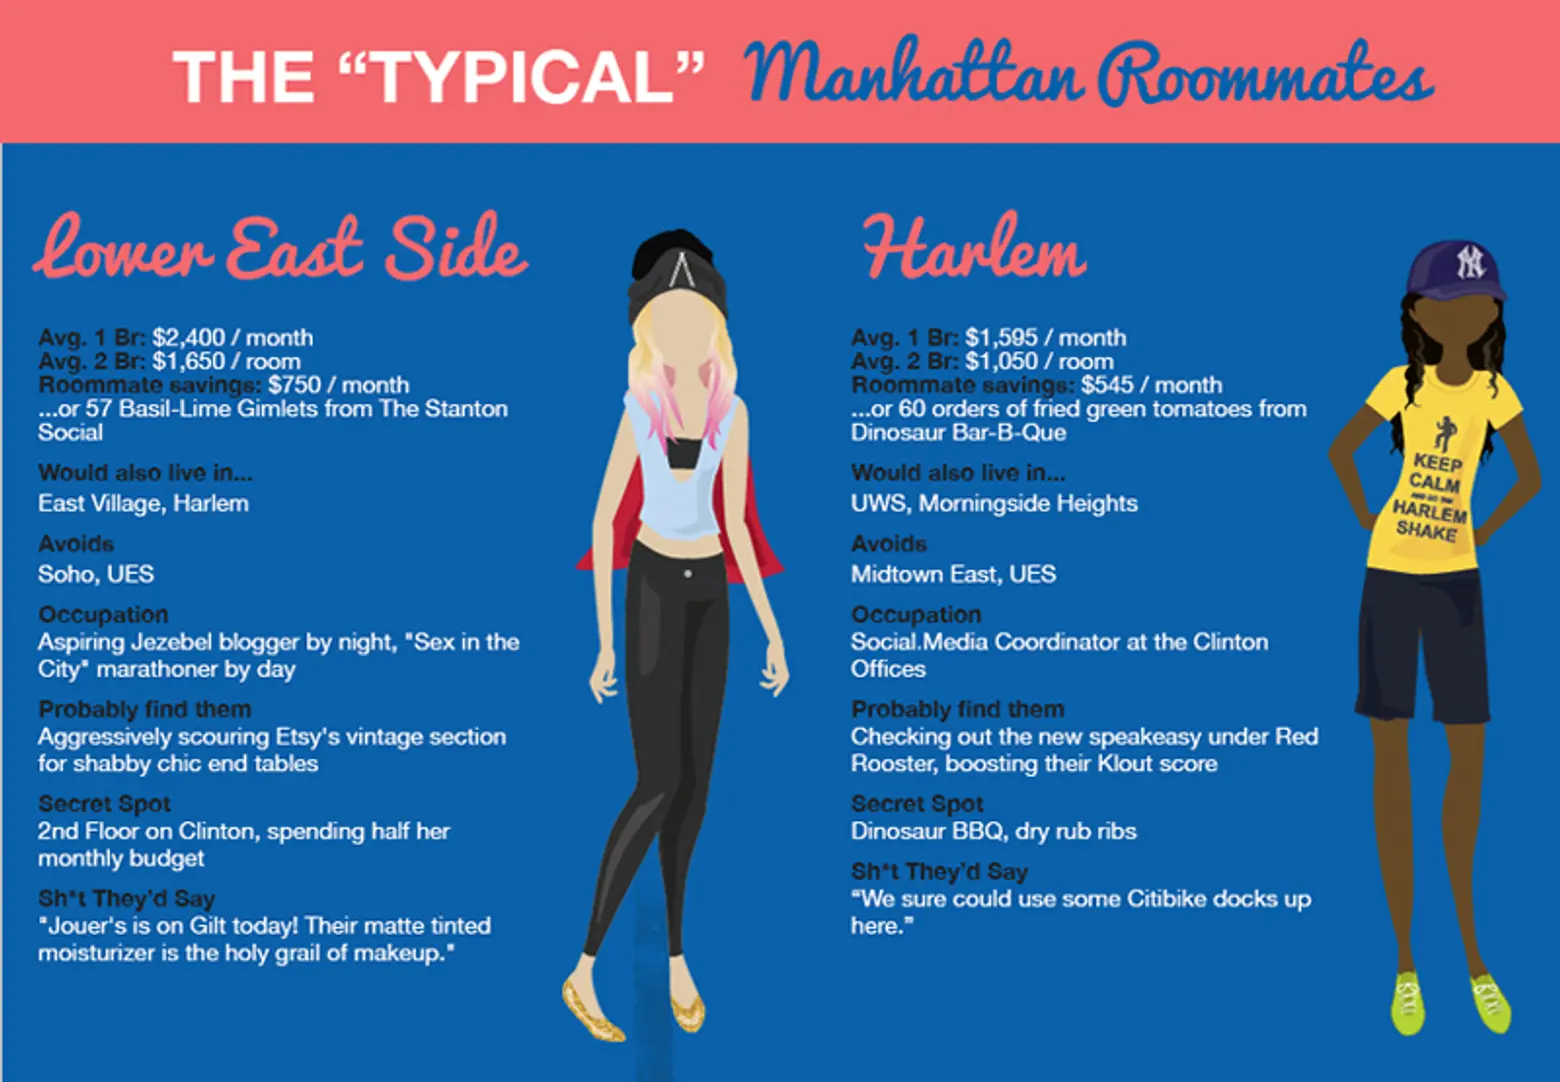 Hilarious Infographic of Manhattan Stereotypes is Spot-On